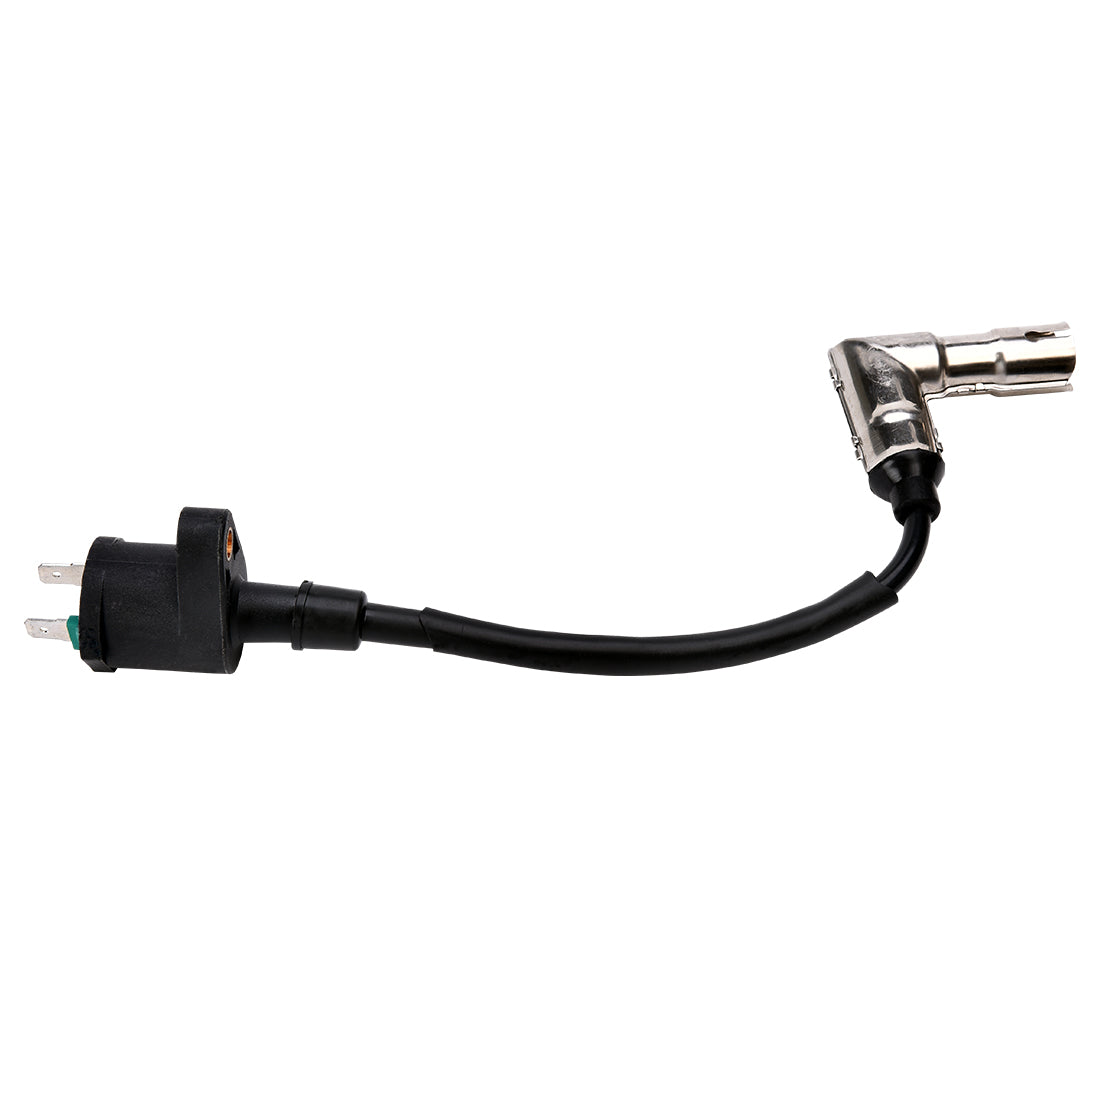 Ignition Coil For Gentrax 2kW Generator (GSI-BXBE)